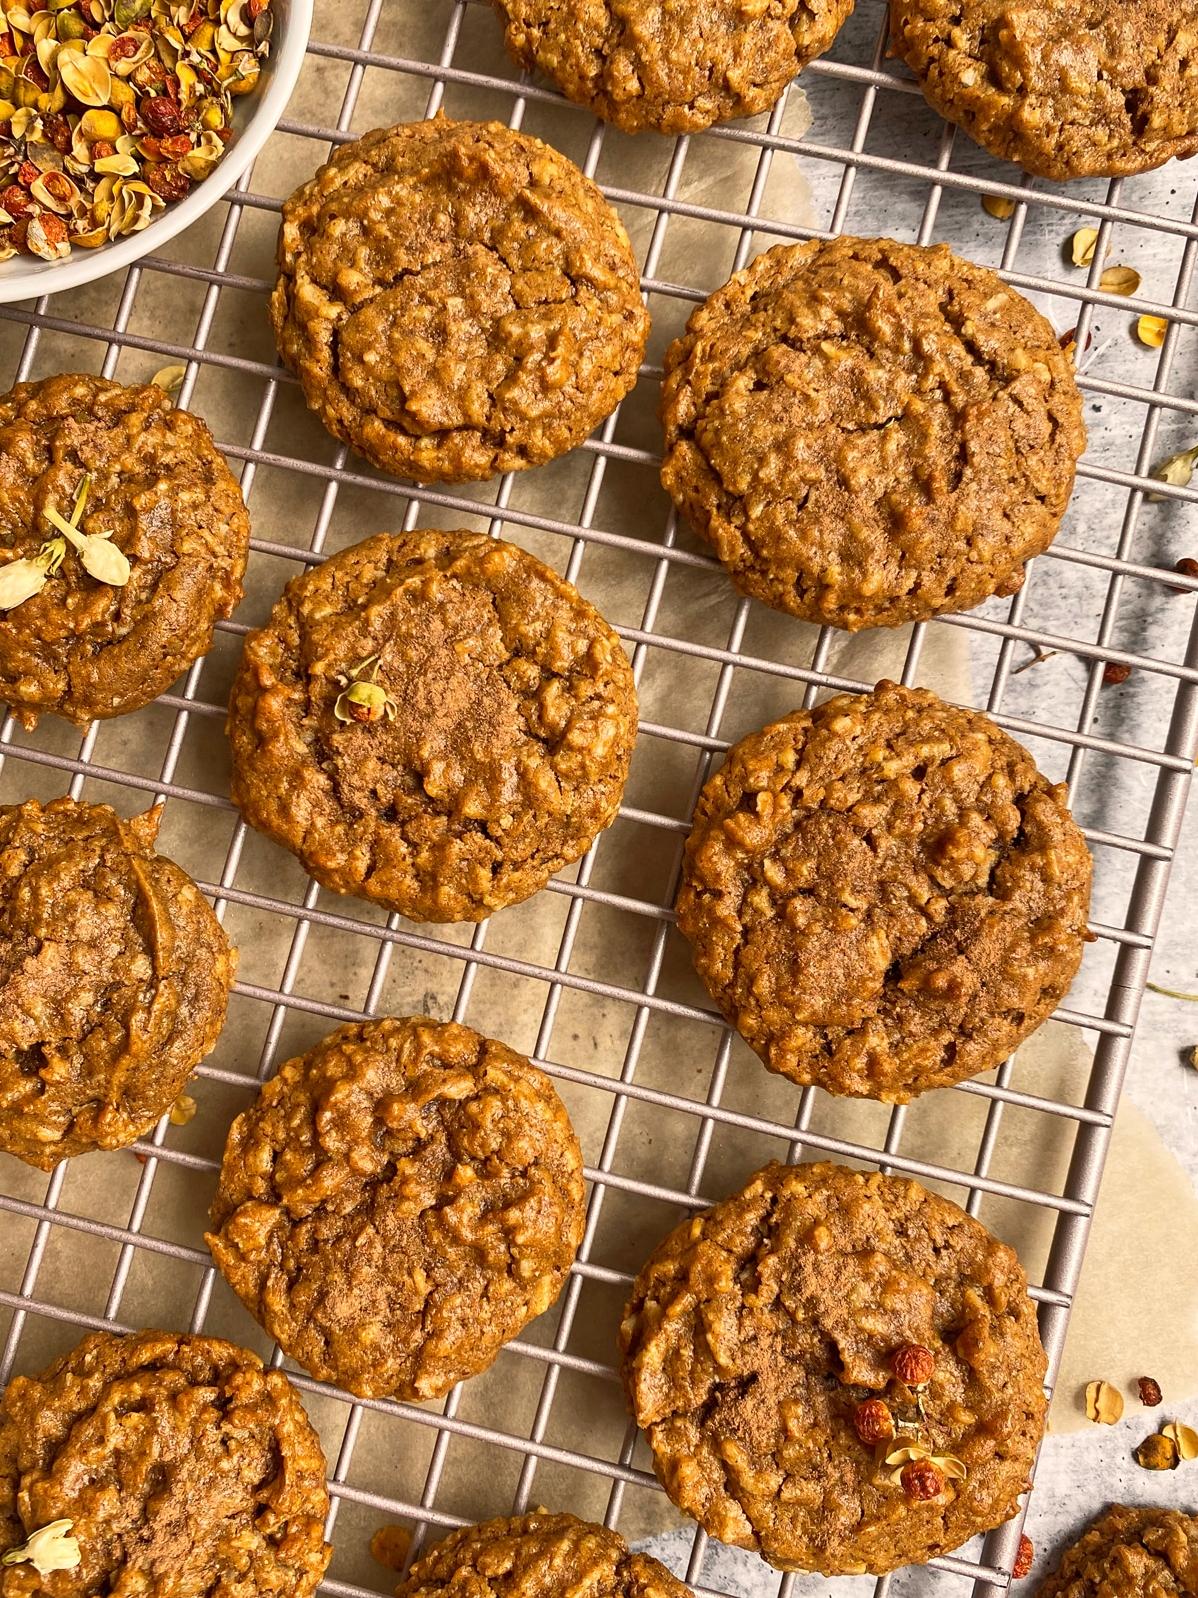  Get ready to impress your guests with these irresistible vegan cookies.